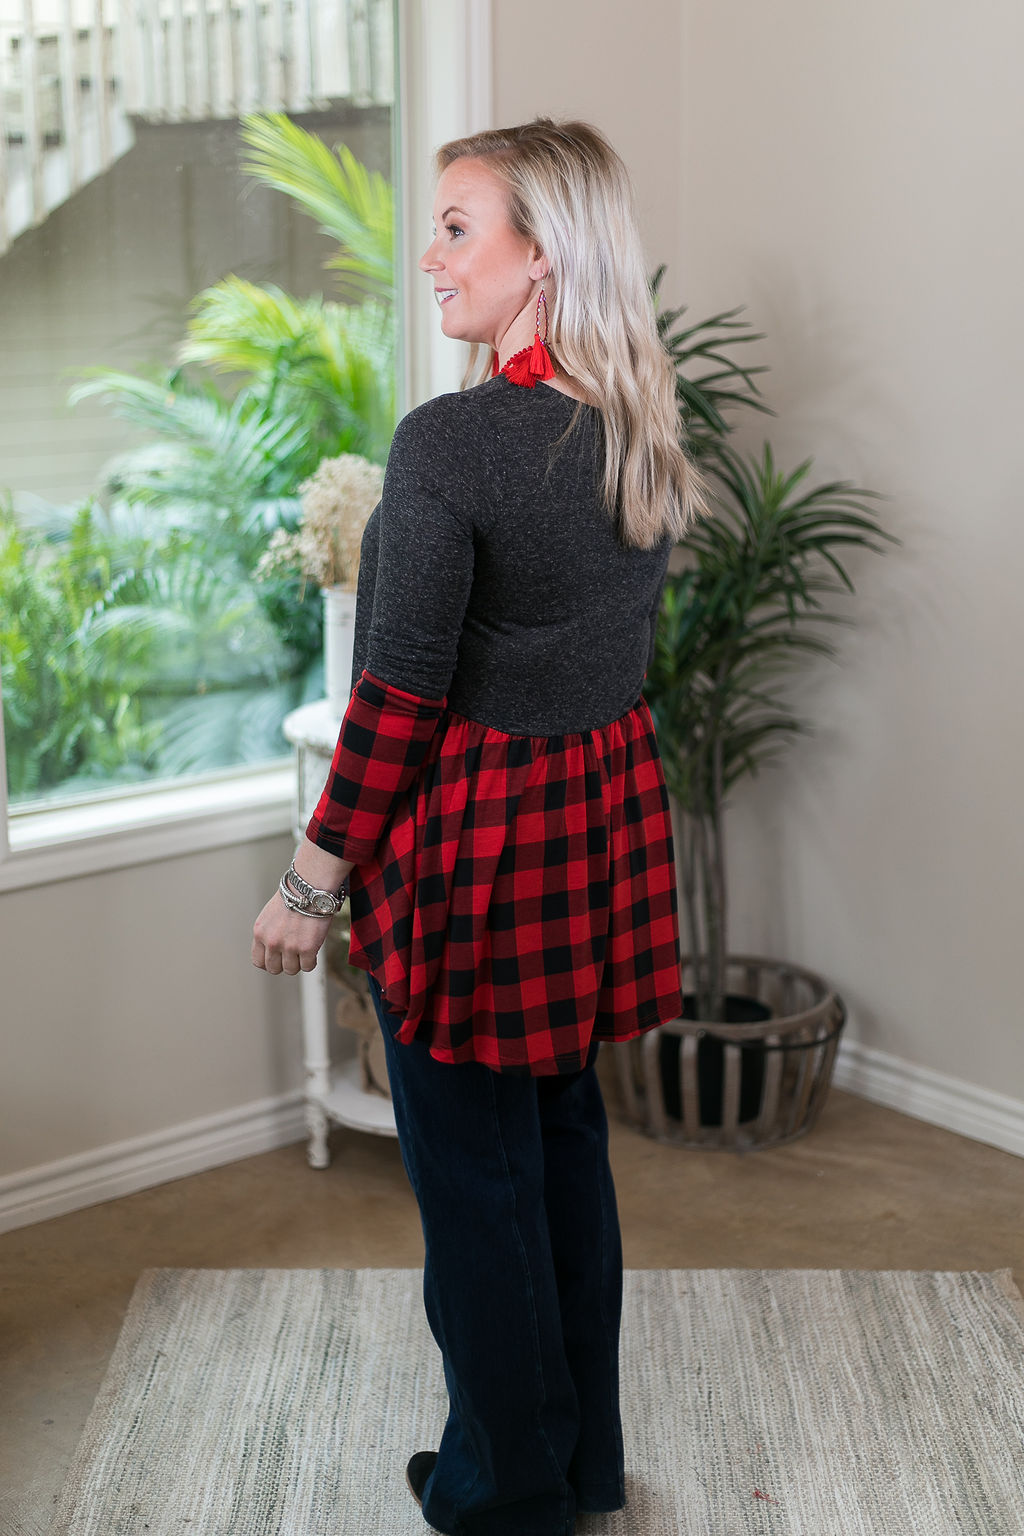 Last Chance Size Small | Perfect Timing Charcoal Top with Red Buffalo Plaid Accent - Giddy Up Glamour Boutique